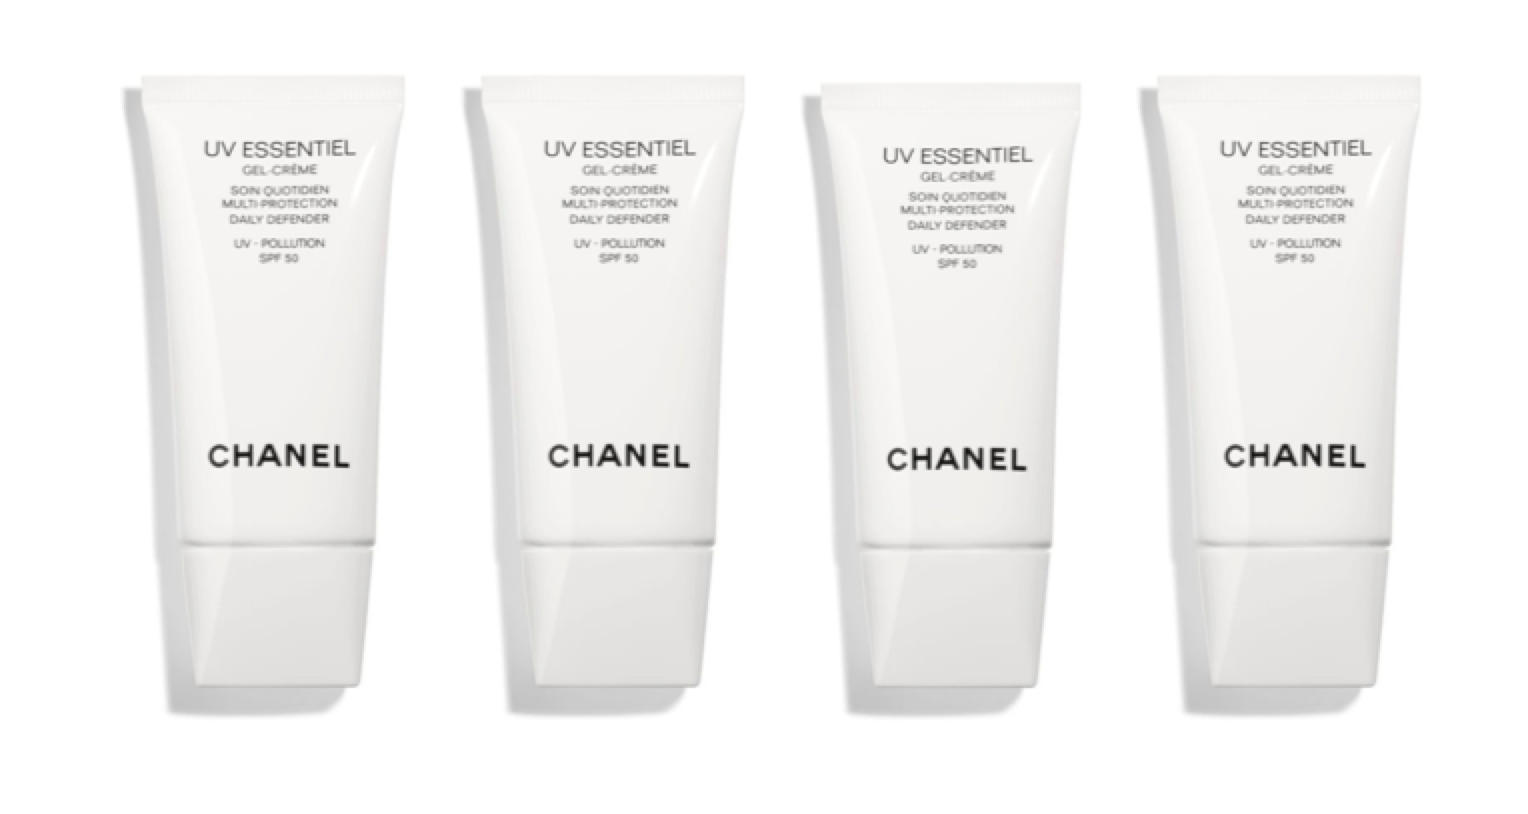 Chanel UV Essentiel Complete Protection SPF50 — Beauty Bible